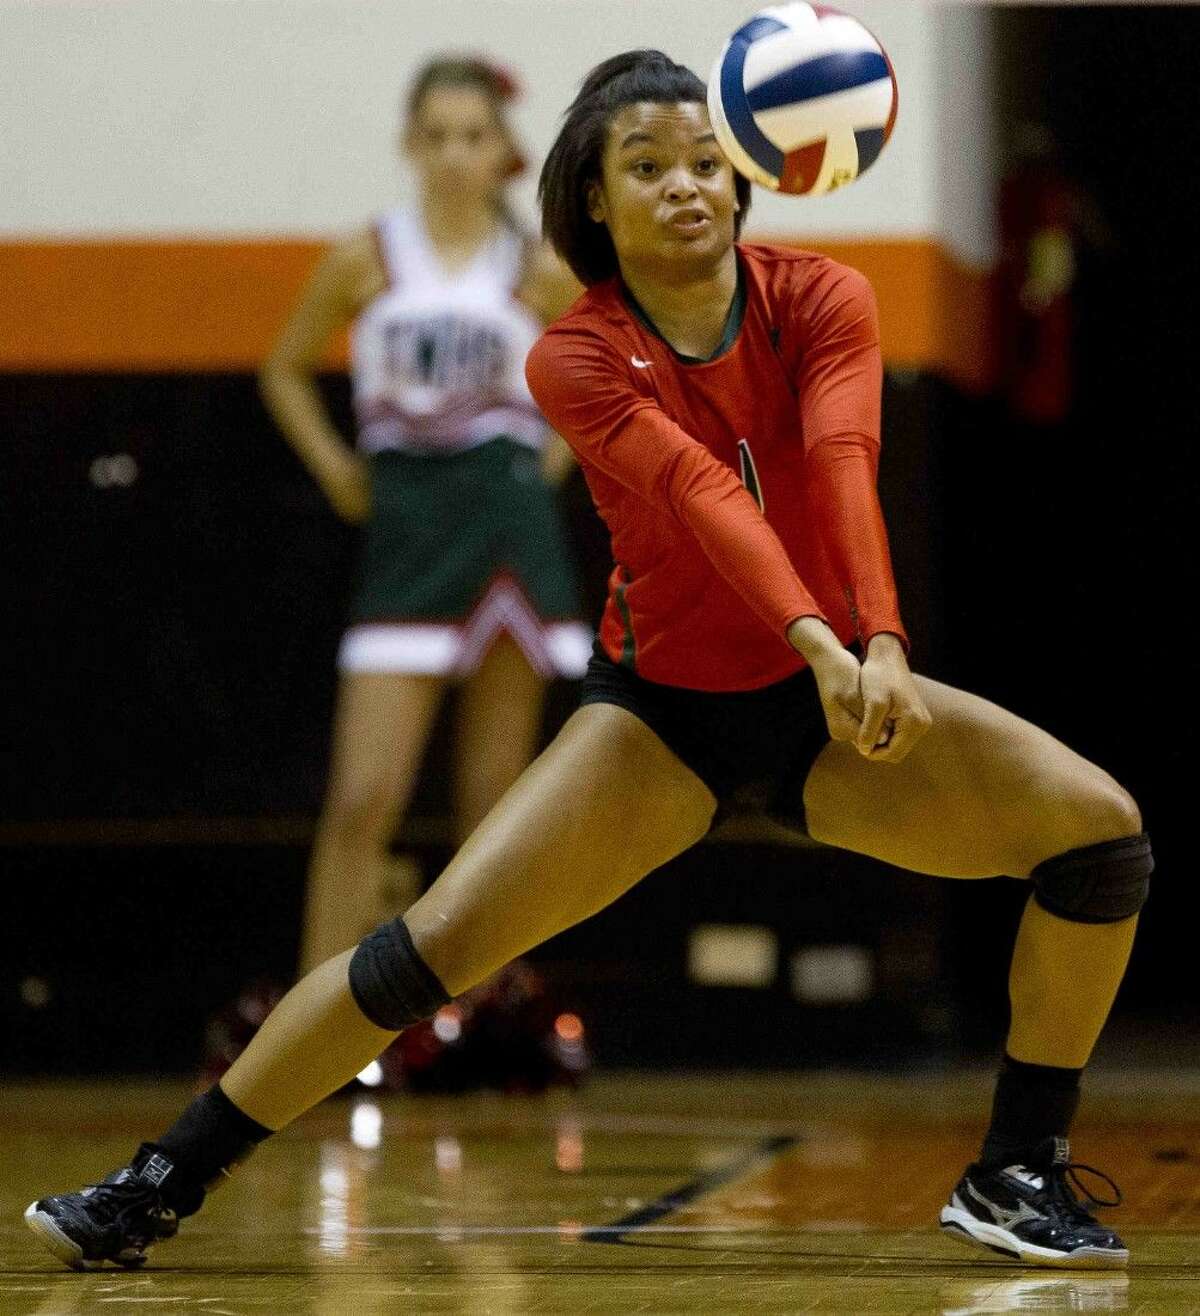 Skylar Scott, The Woodlands, returns a hit during a Region II-6A regional semifinal match Friday, Nov. 13, 2015, in Huntsville. To view or purchase this photo and others like it, visit HCNpics.com.